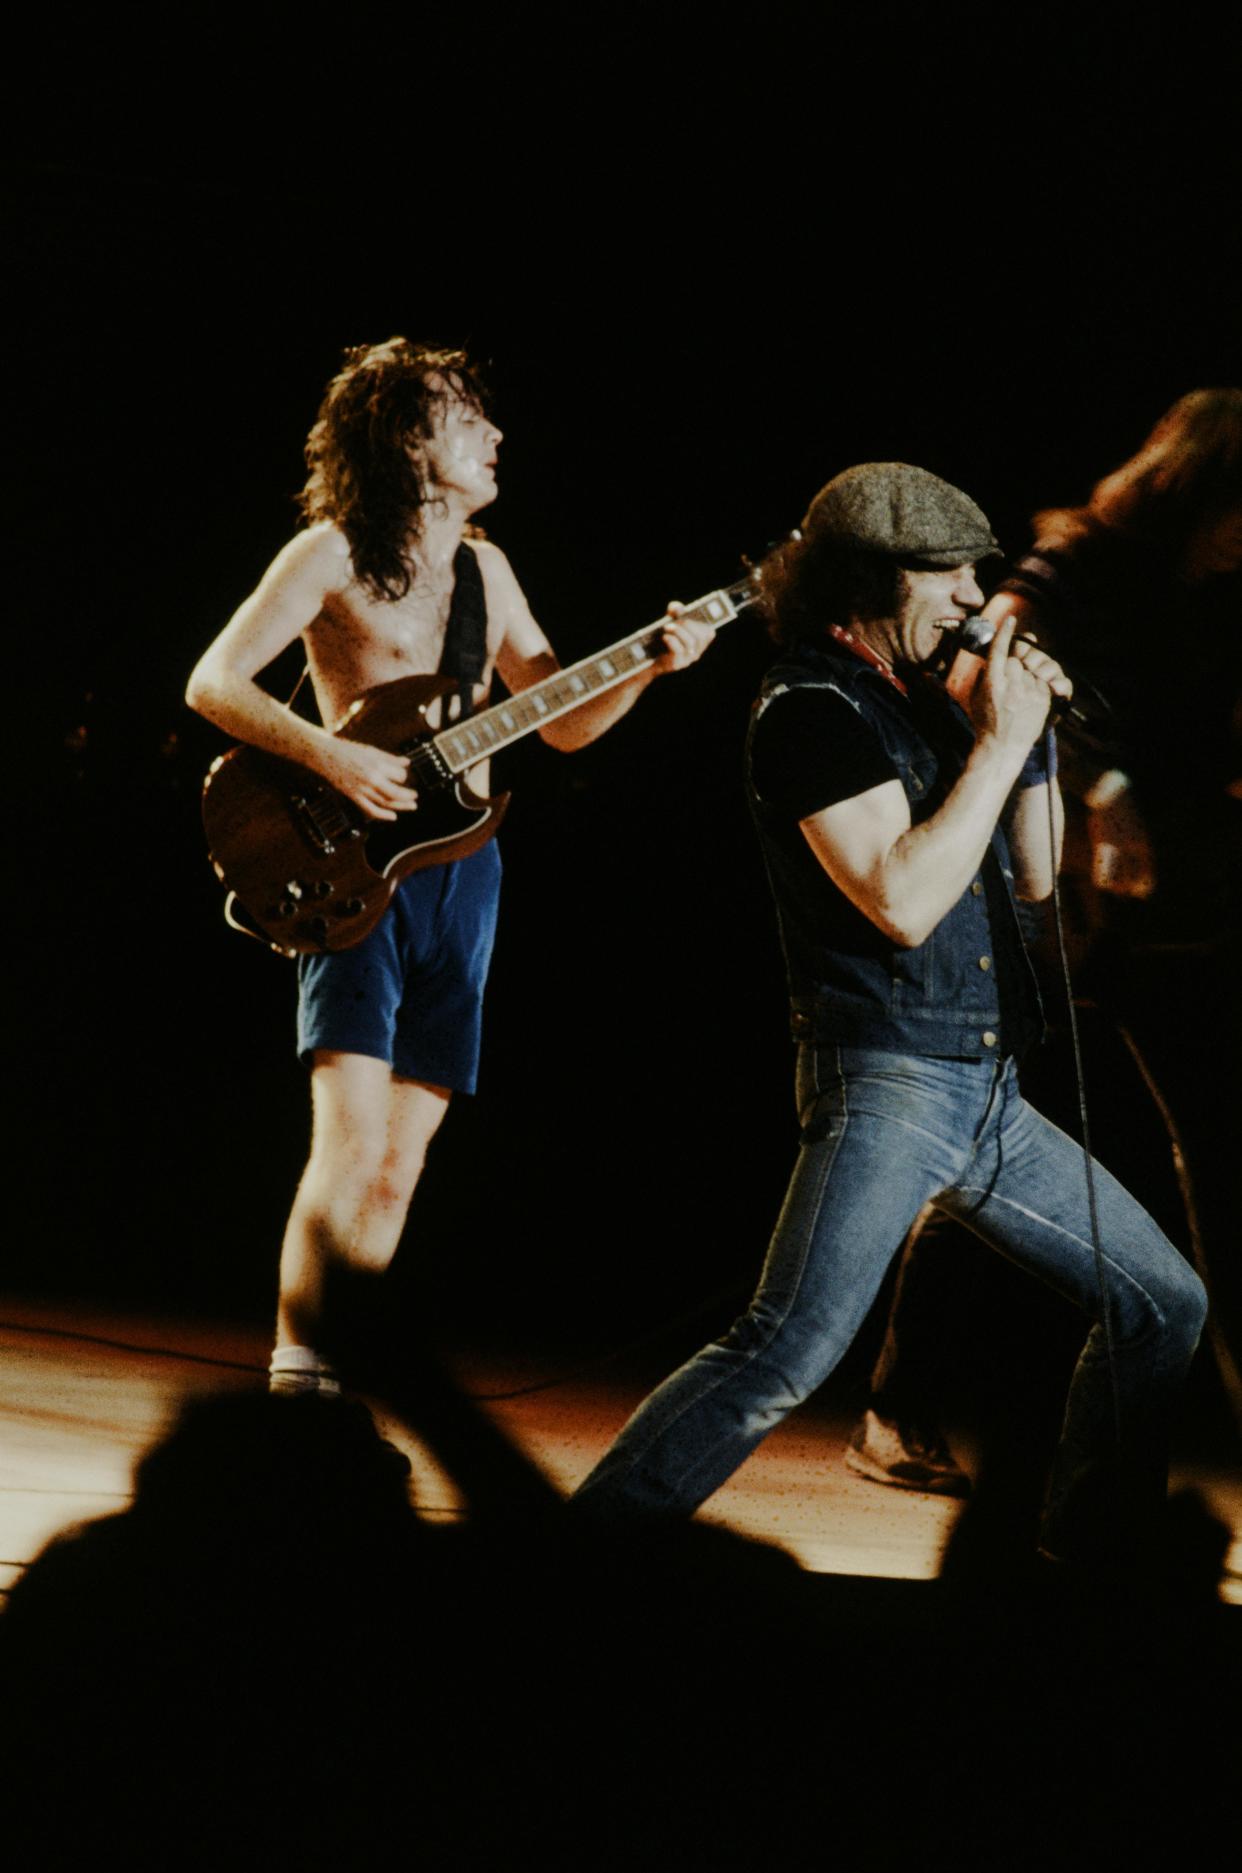 Brian Johnson singing with AC/DC in the early '80s. (Photo